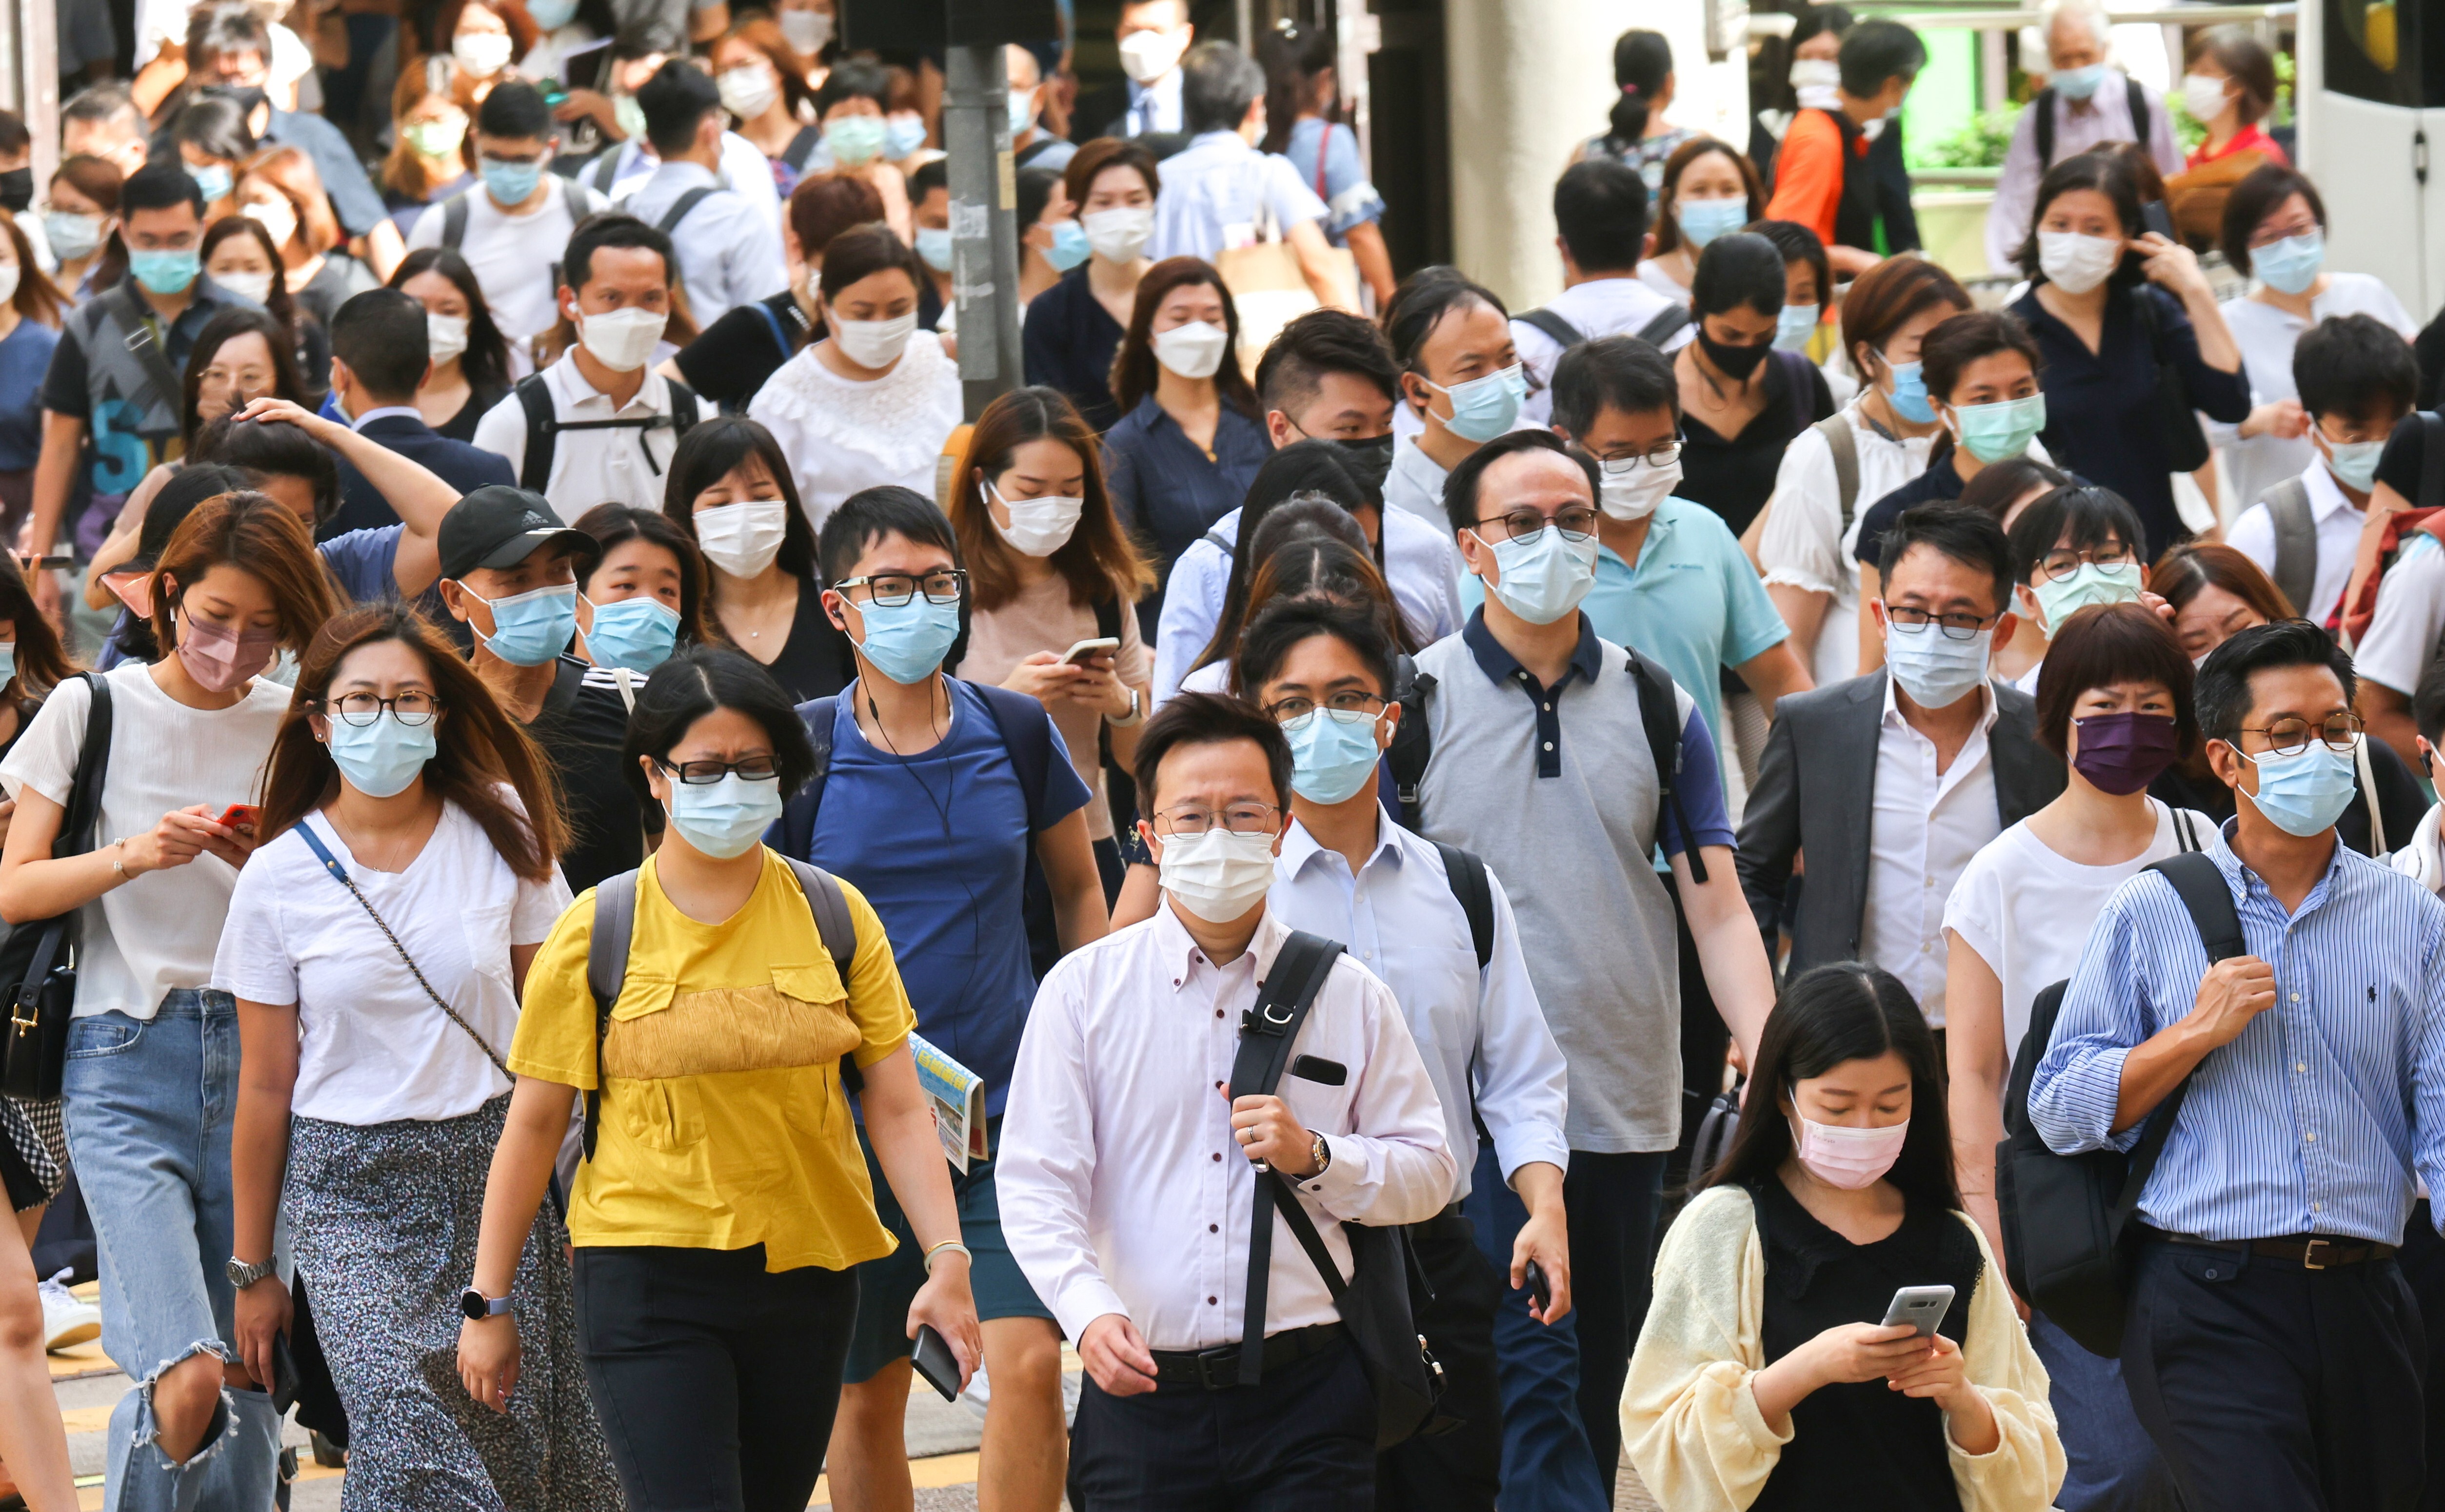 Demand for services provided by NGOs has been high during the Covid-19 pandemic. Photo: Dickson Lee